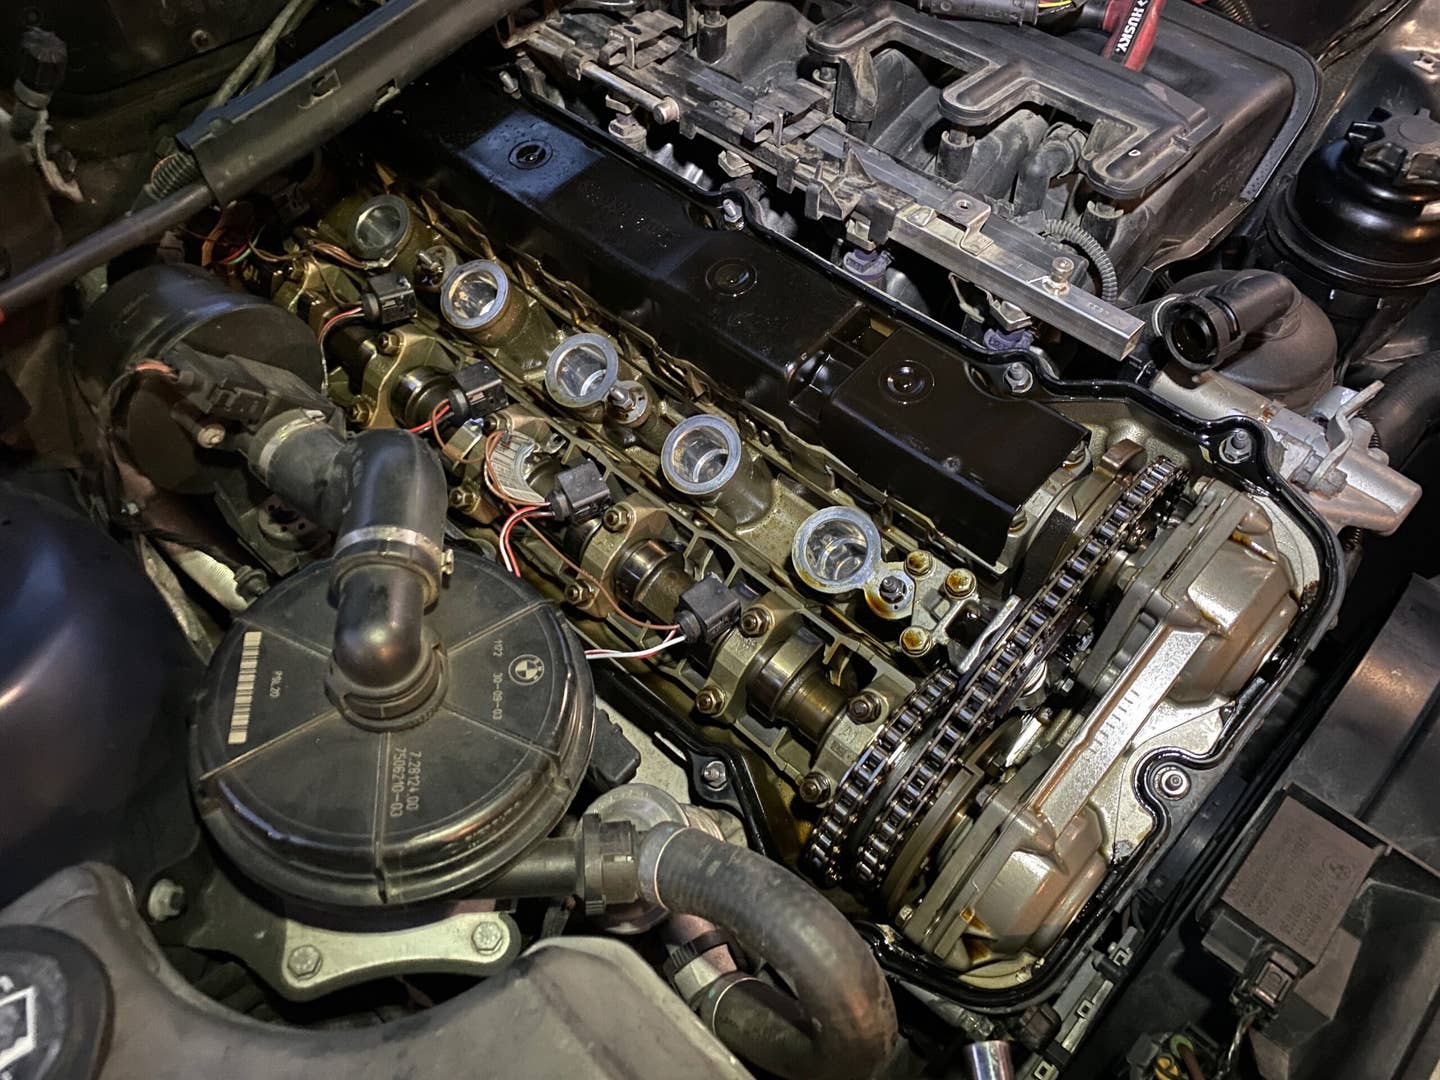 A BMW straight six engine with its valve cover removed, exposing a gold tinged valvetrain.